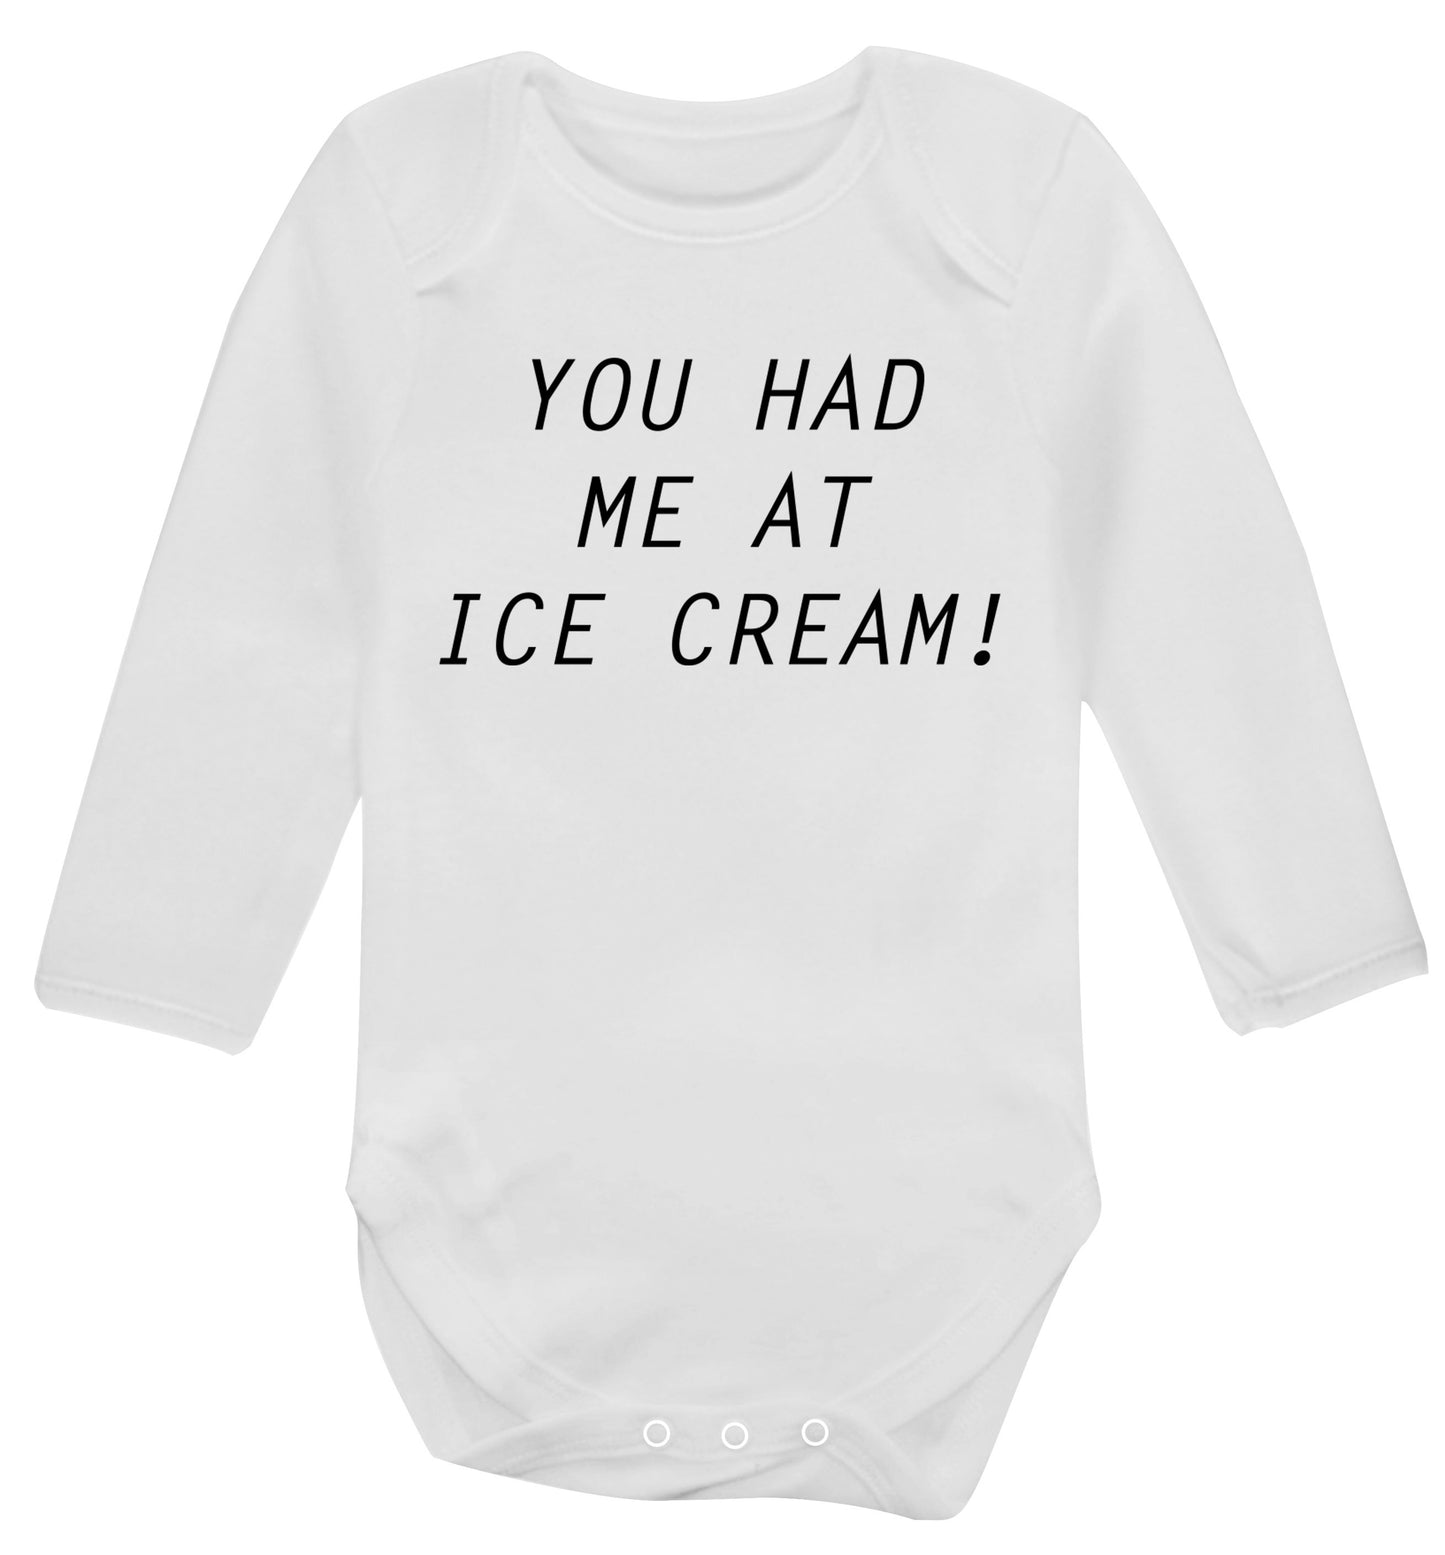 You had me at ice cream Baby Vest long sleeved white 6-12 months